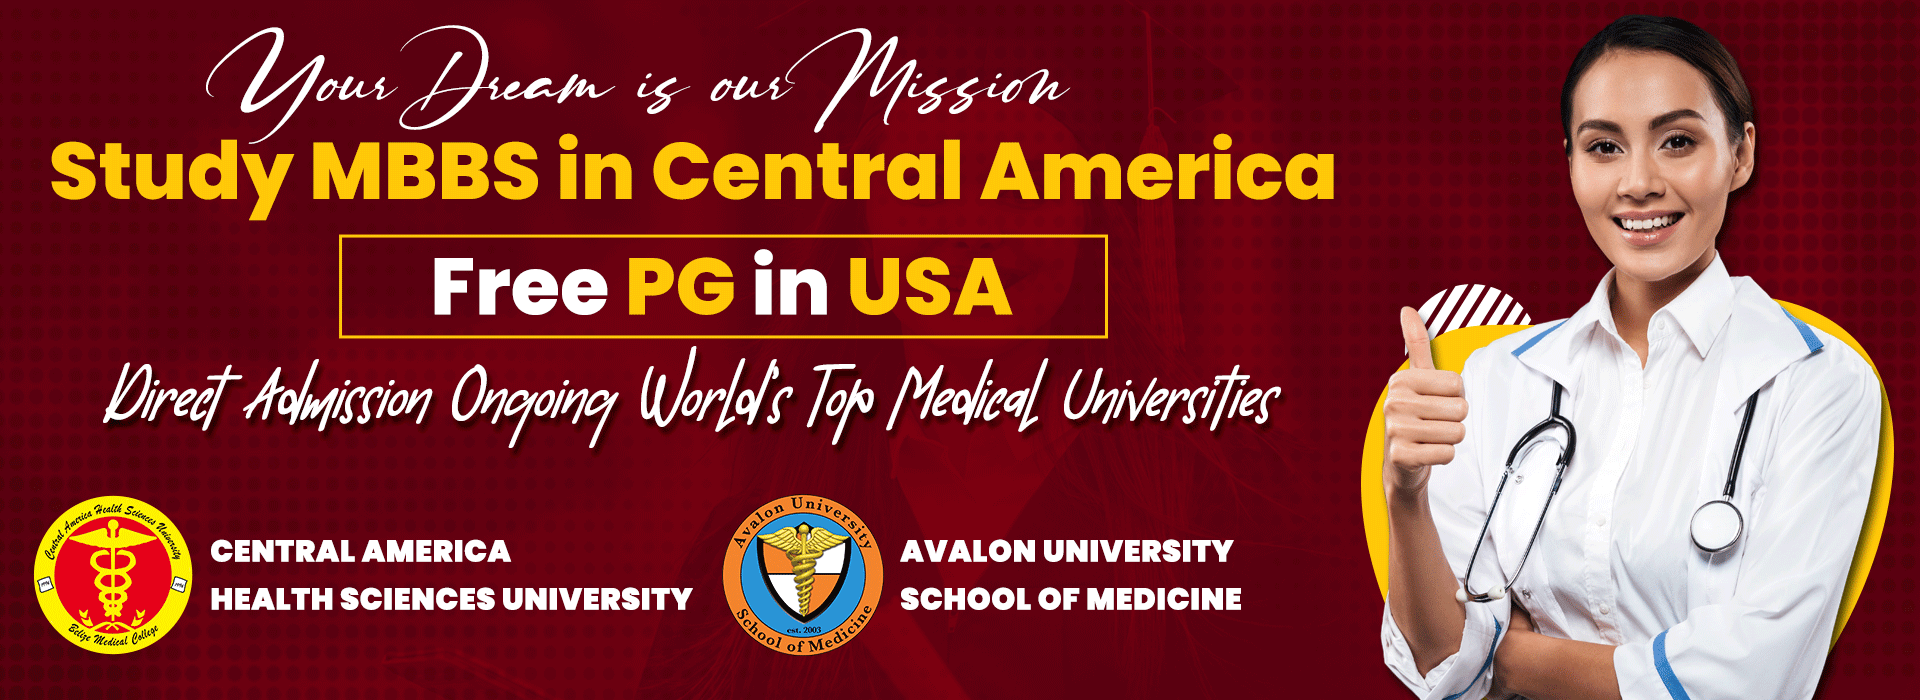 MBBS in Central America and USA